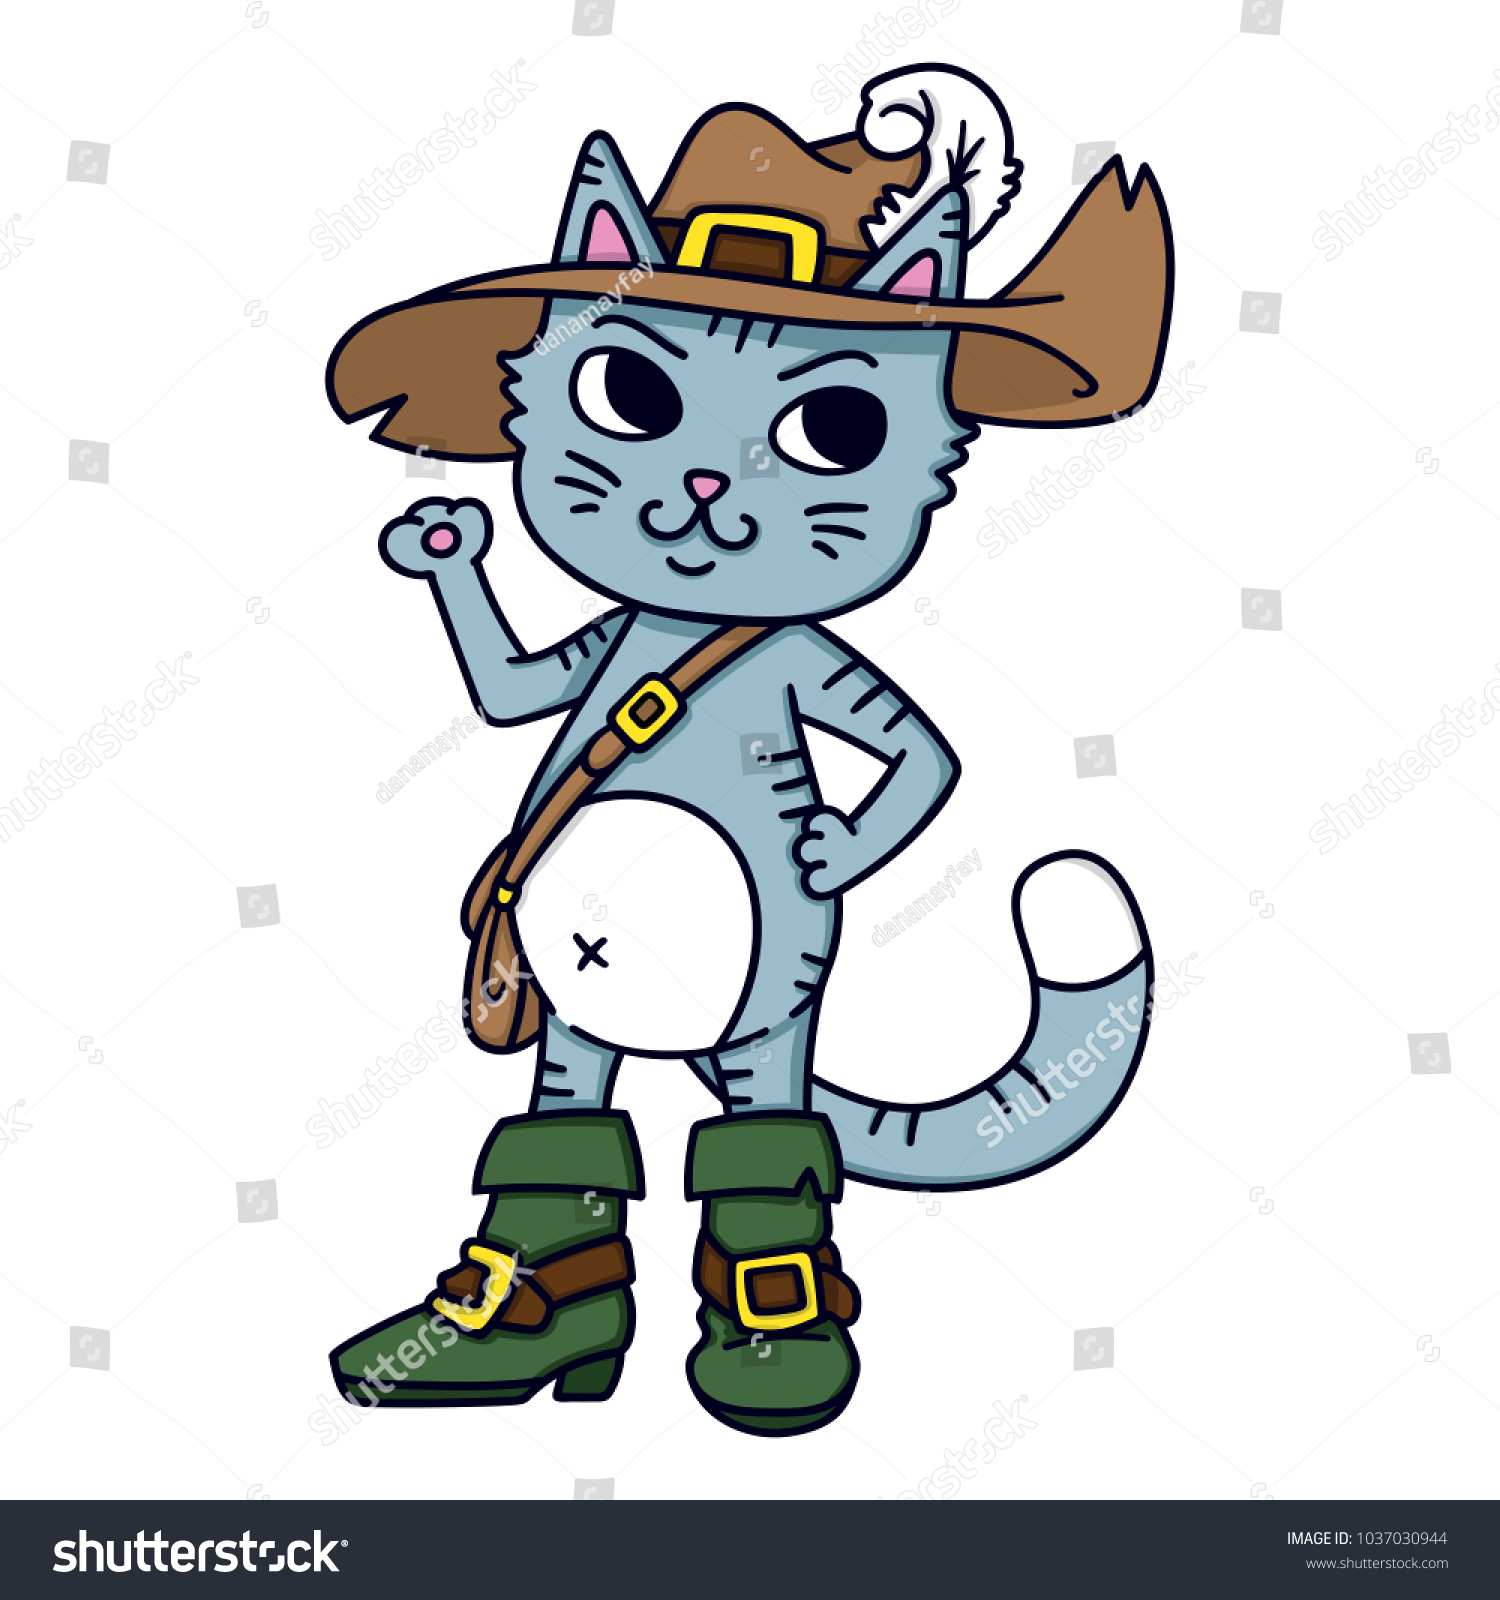 SVG of Puss in boots. Children illustration. Isolated objects on white background. Vector illustration. svg